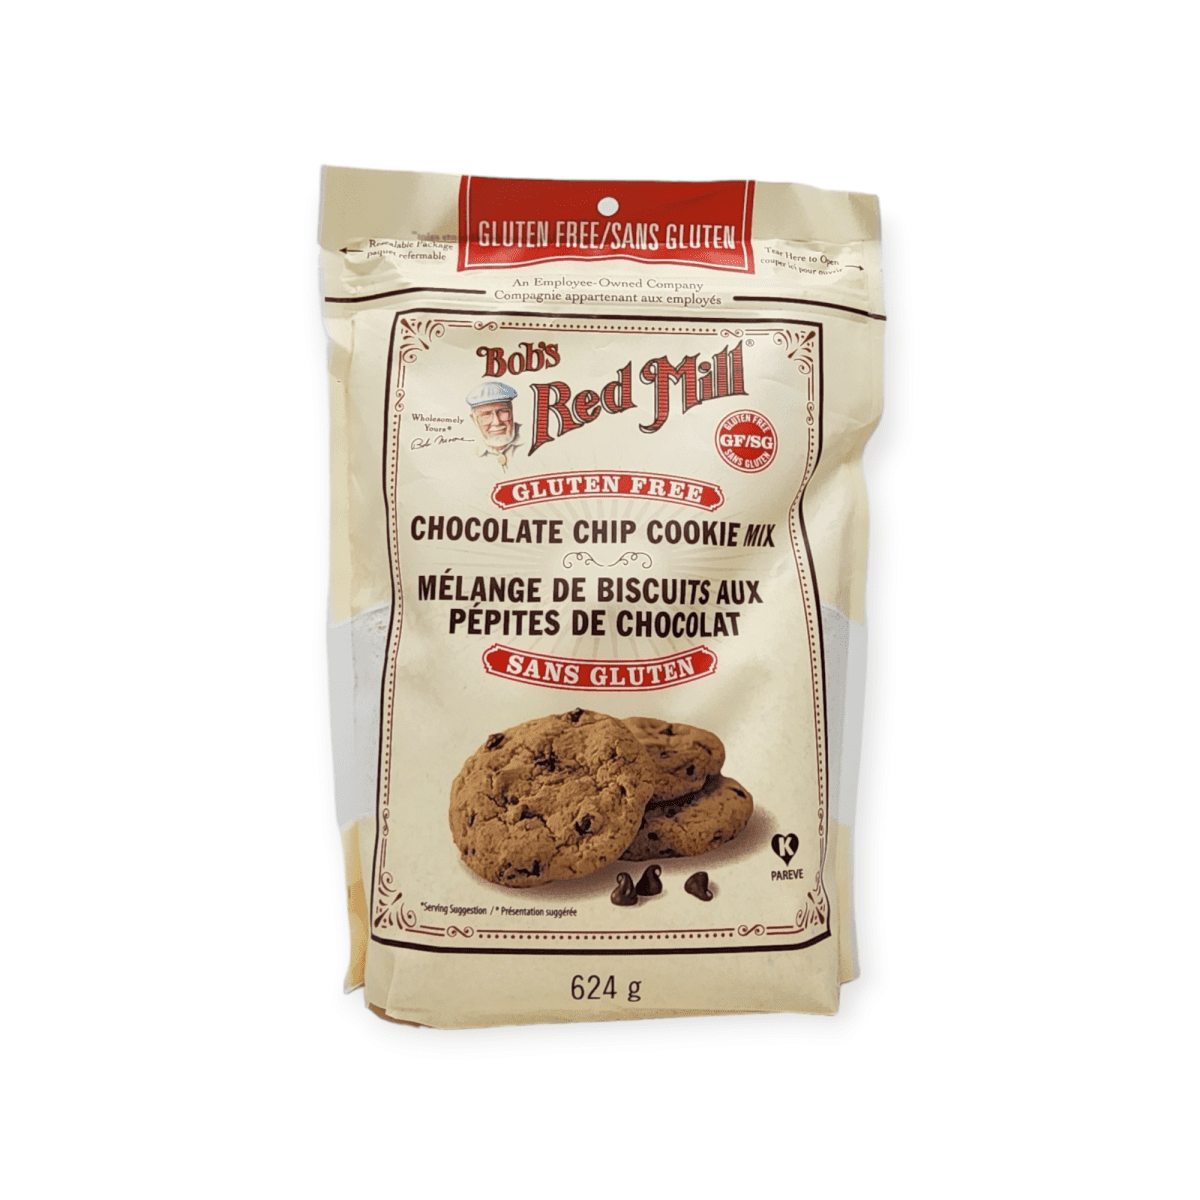 Bob’s Red Mill Chocolate Chip Cookie Mix (624g)